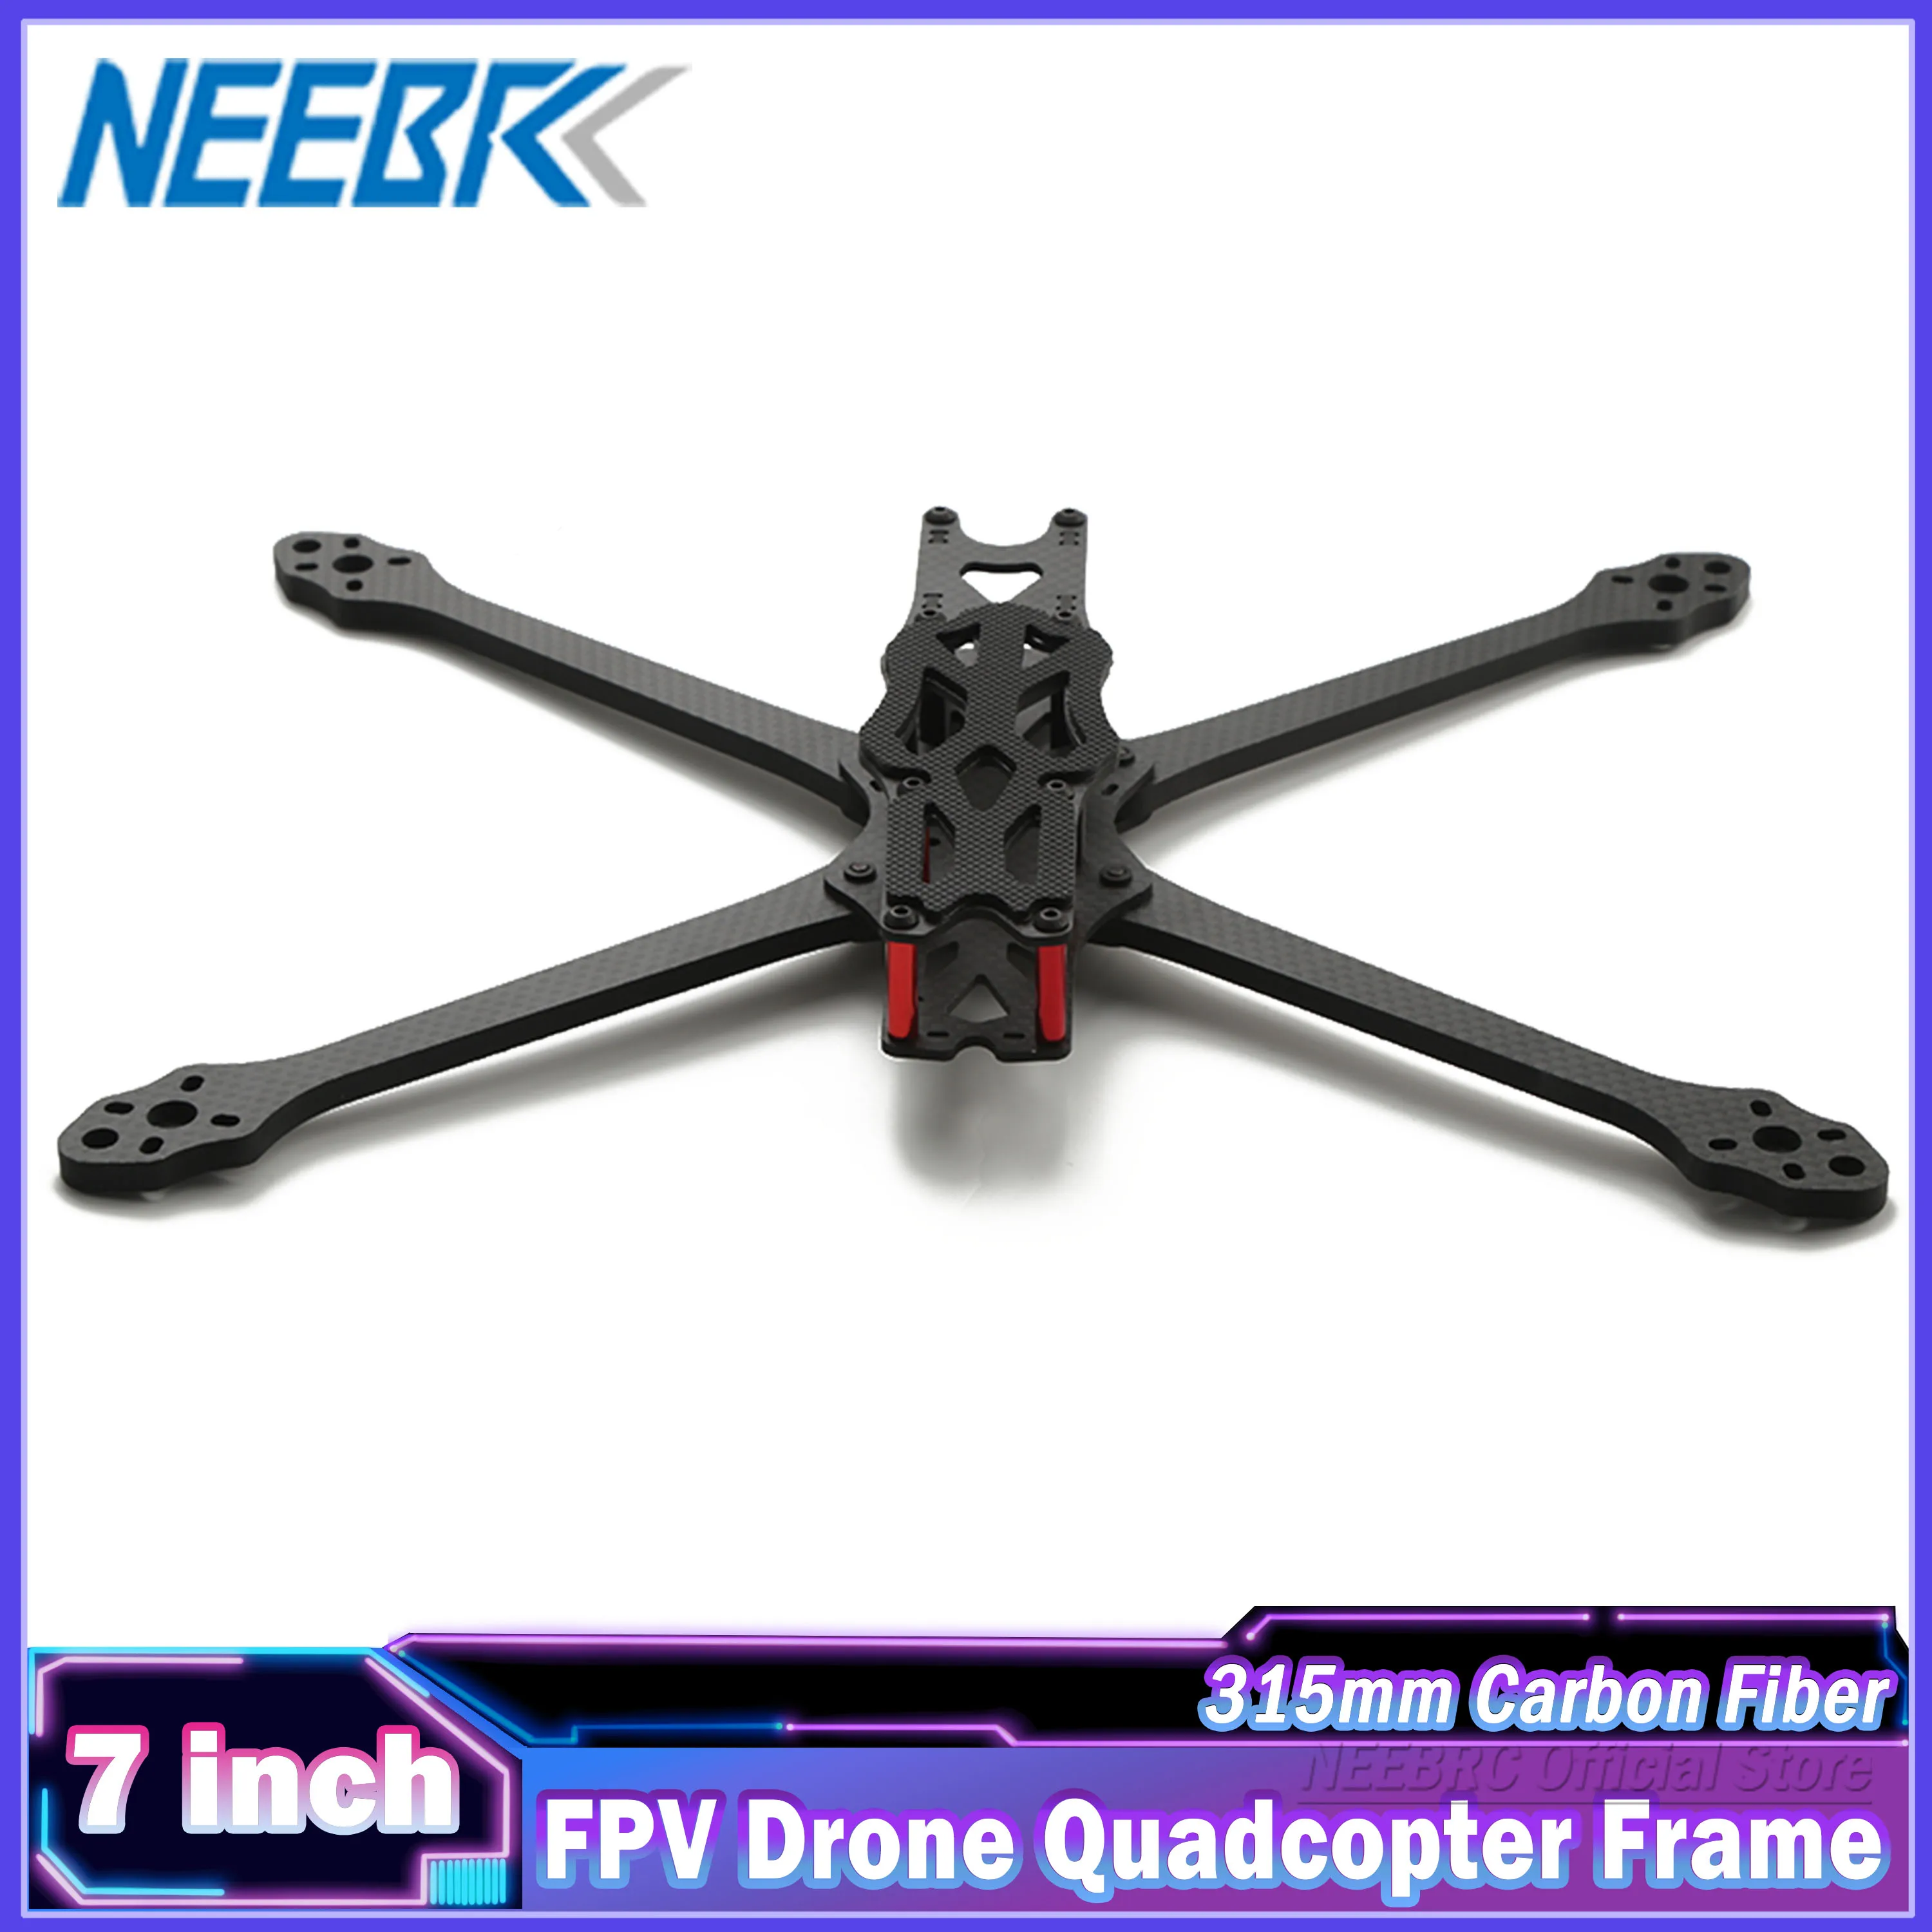 

7inch 315mm Quadcopter Frame Carbon Fiber FPV 5.5mm Arm Kit Freestyle for APEX DIY RC Racing Drone Four-axle Aerial Model Plane